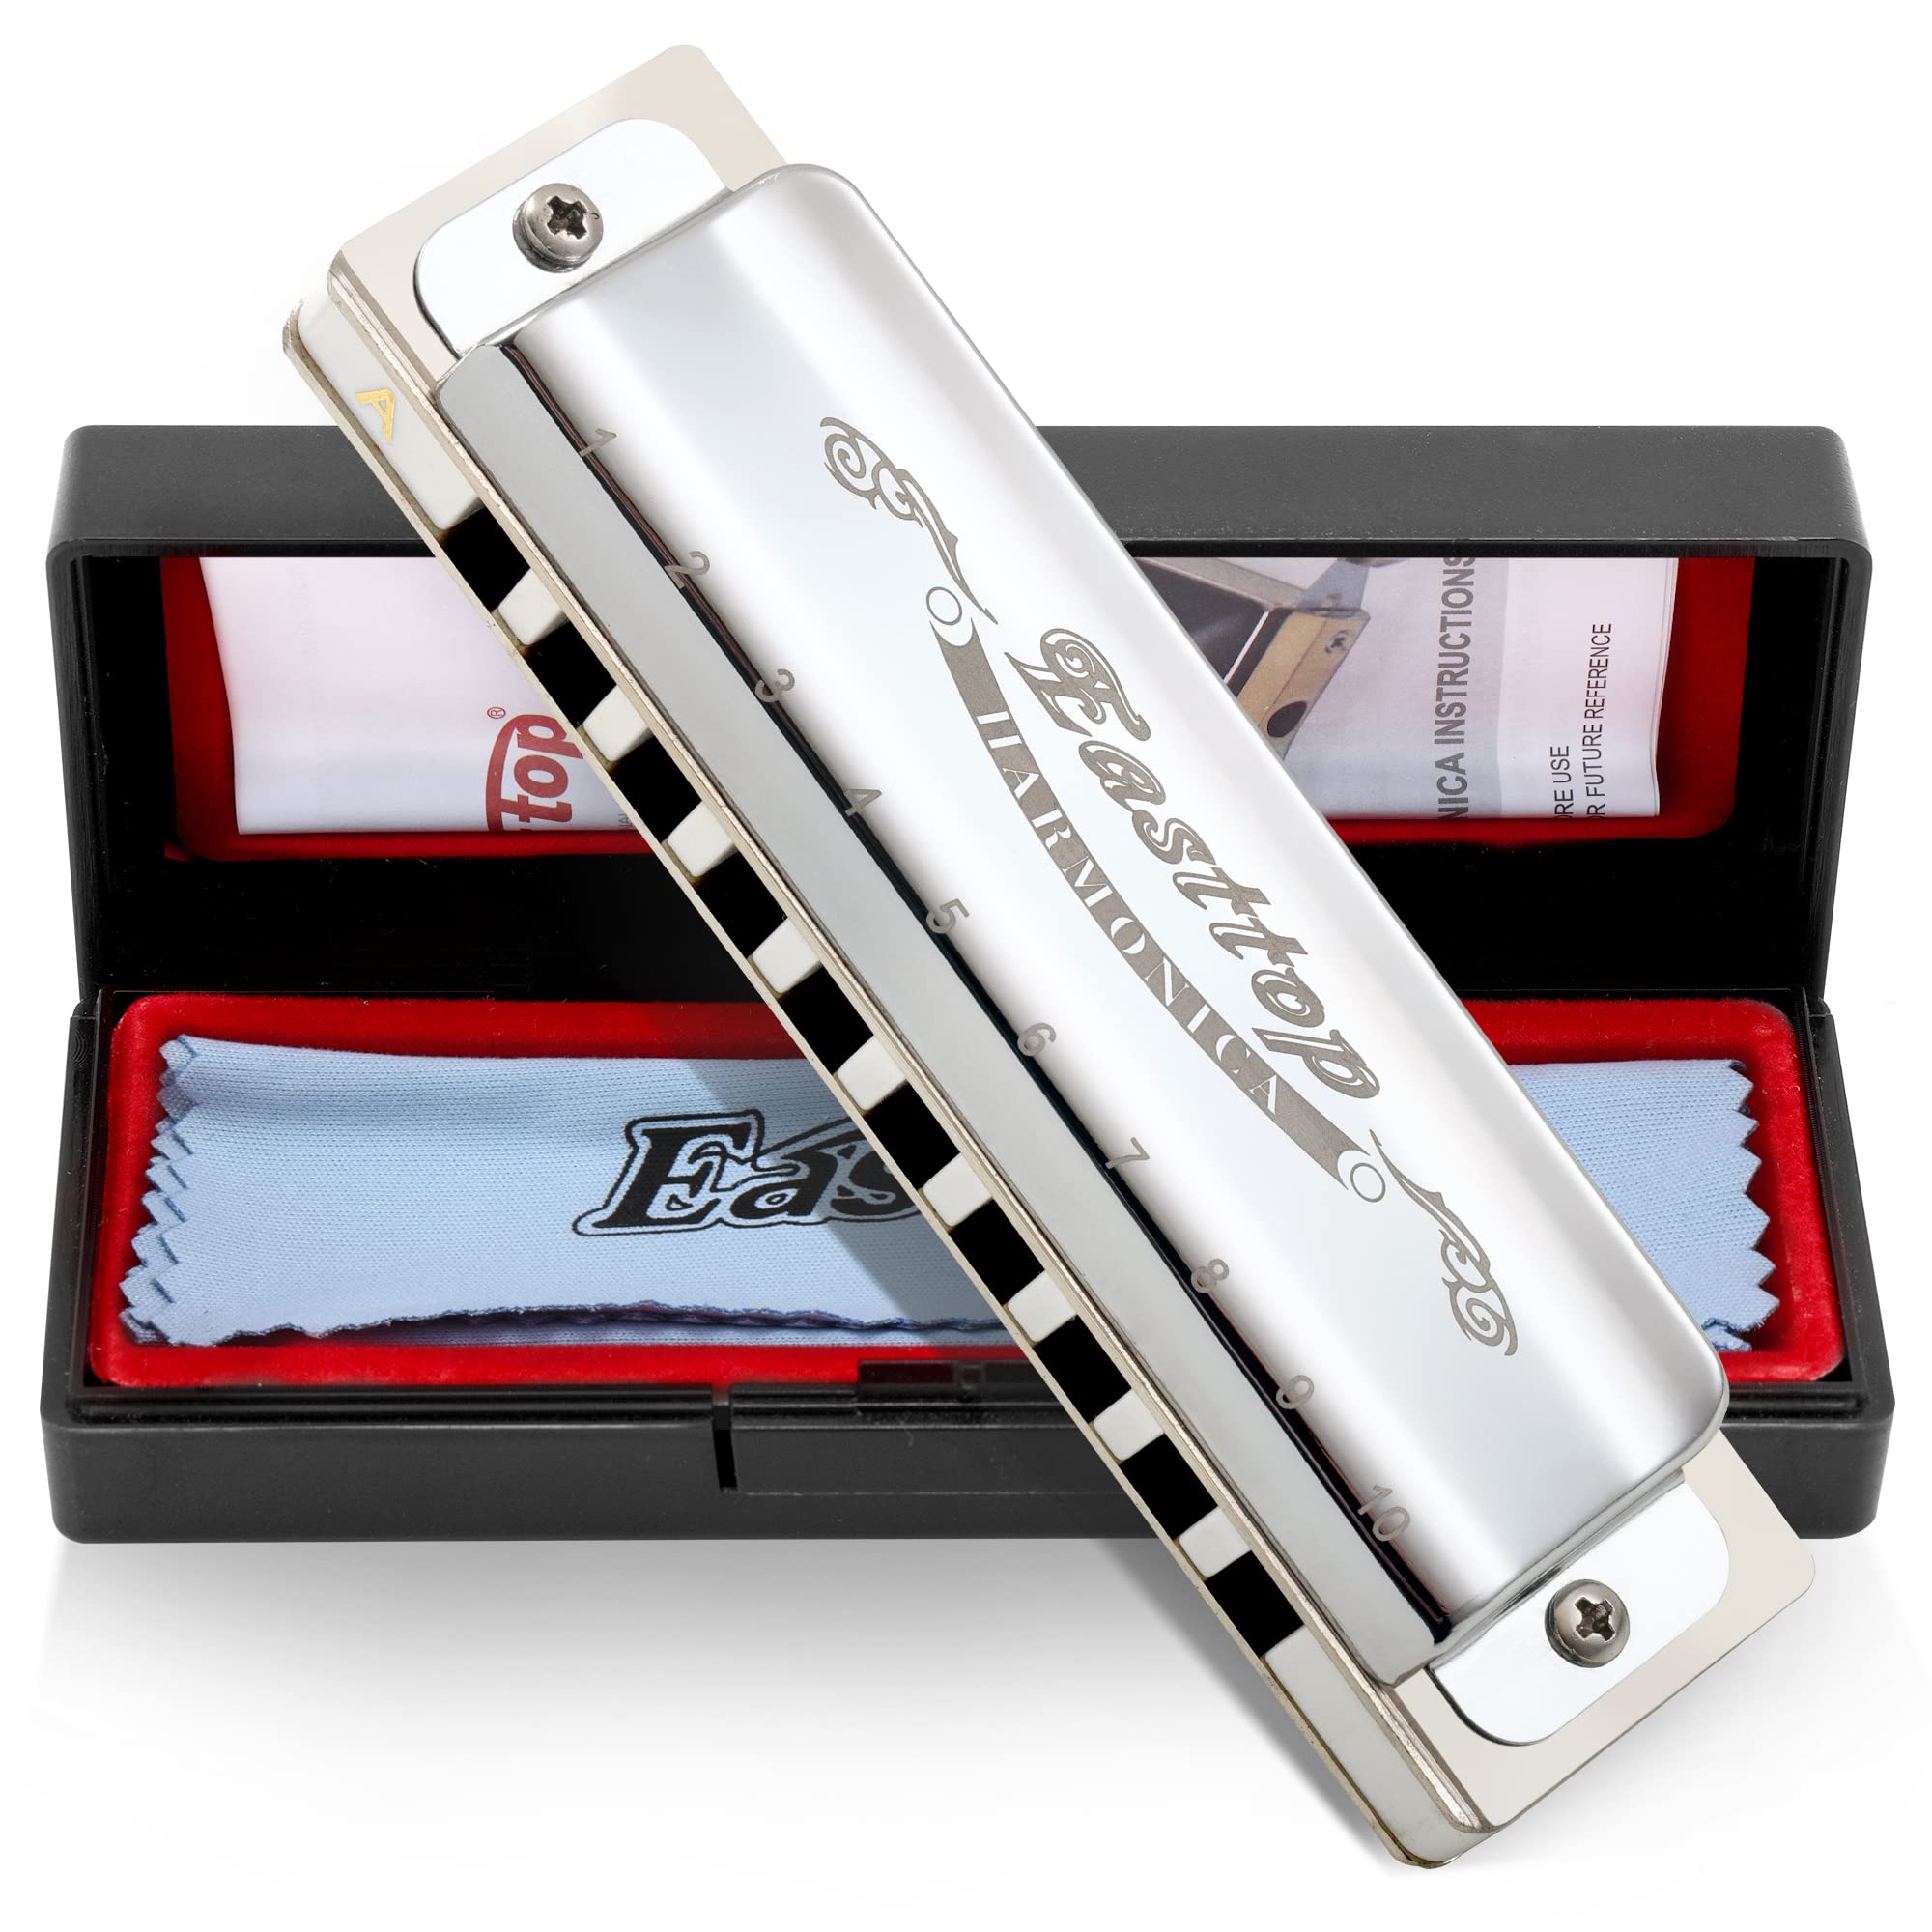 East top Harmonica, Diatonic Blues Harmonica,Major 12 Keys Available, 10 Holes Blues Harp Diatonic Blues Mouth Organ T008, Silver Harmonica For Adults, Professional Player and Students(T008) - Easttop harmonica